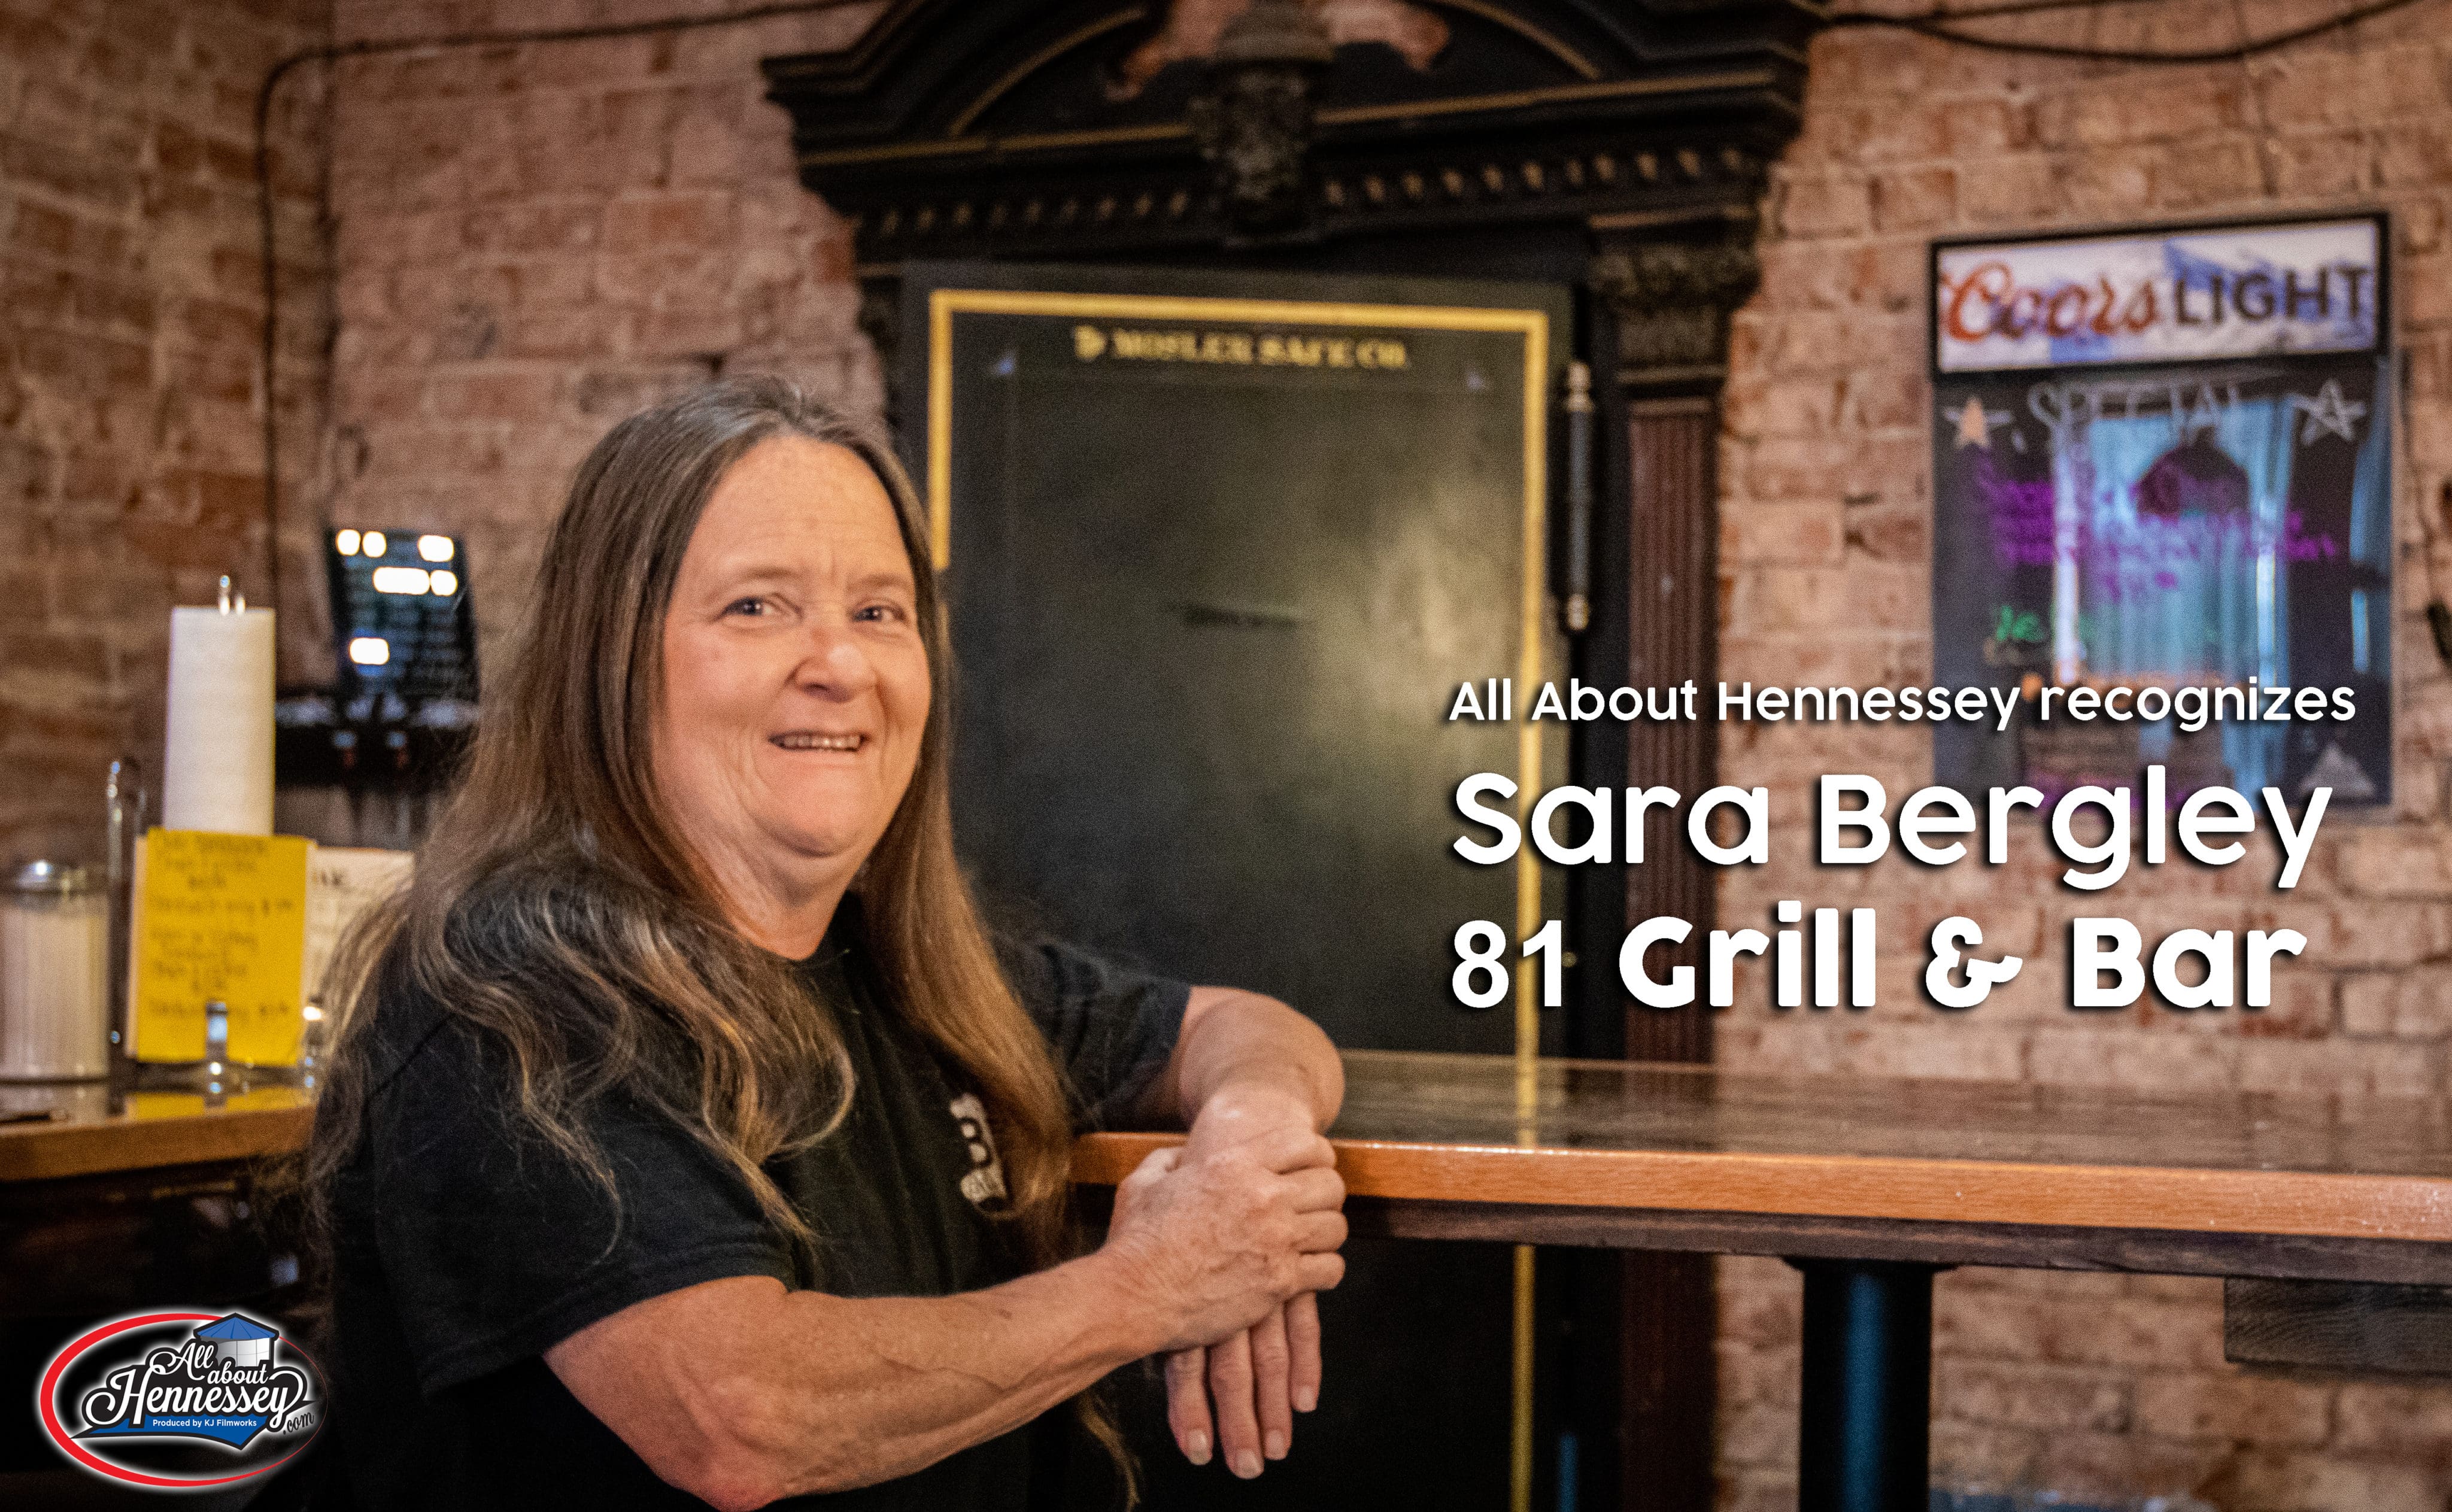 THIS WEEK ALL ABOUT HENNESSEY RECOGNIZES SARA BERGLEY – 81 Grill & Bar as our Woman in Business.